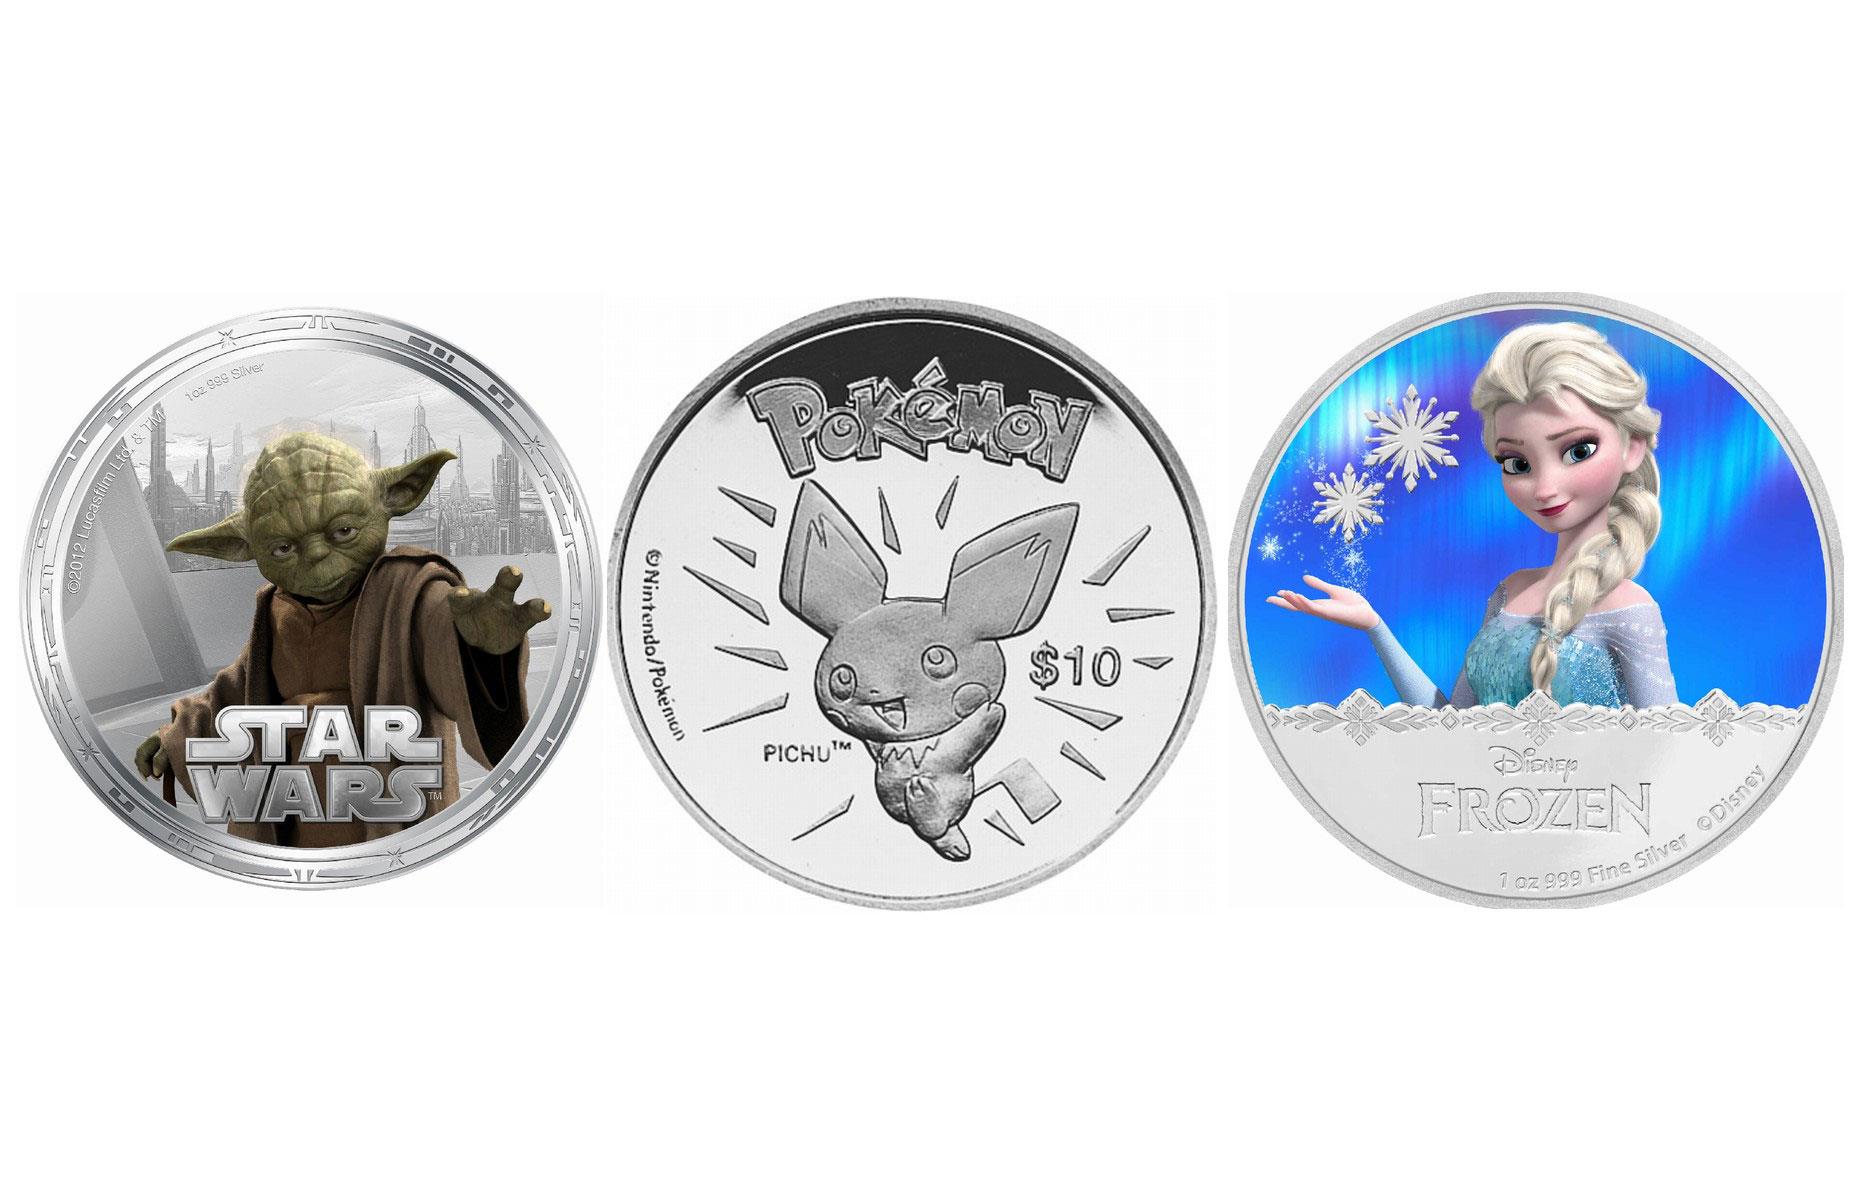 Star Wars, Pokémon and Frozen coins are legal tender on the island of Niue